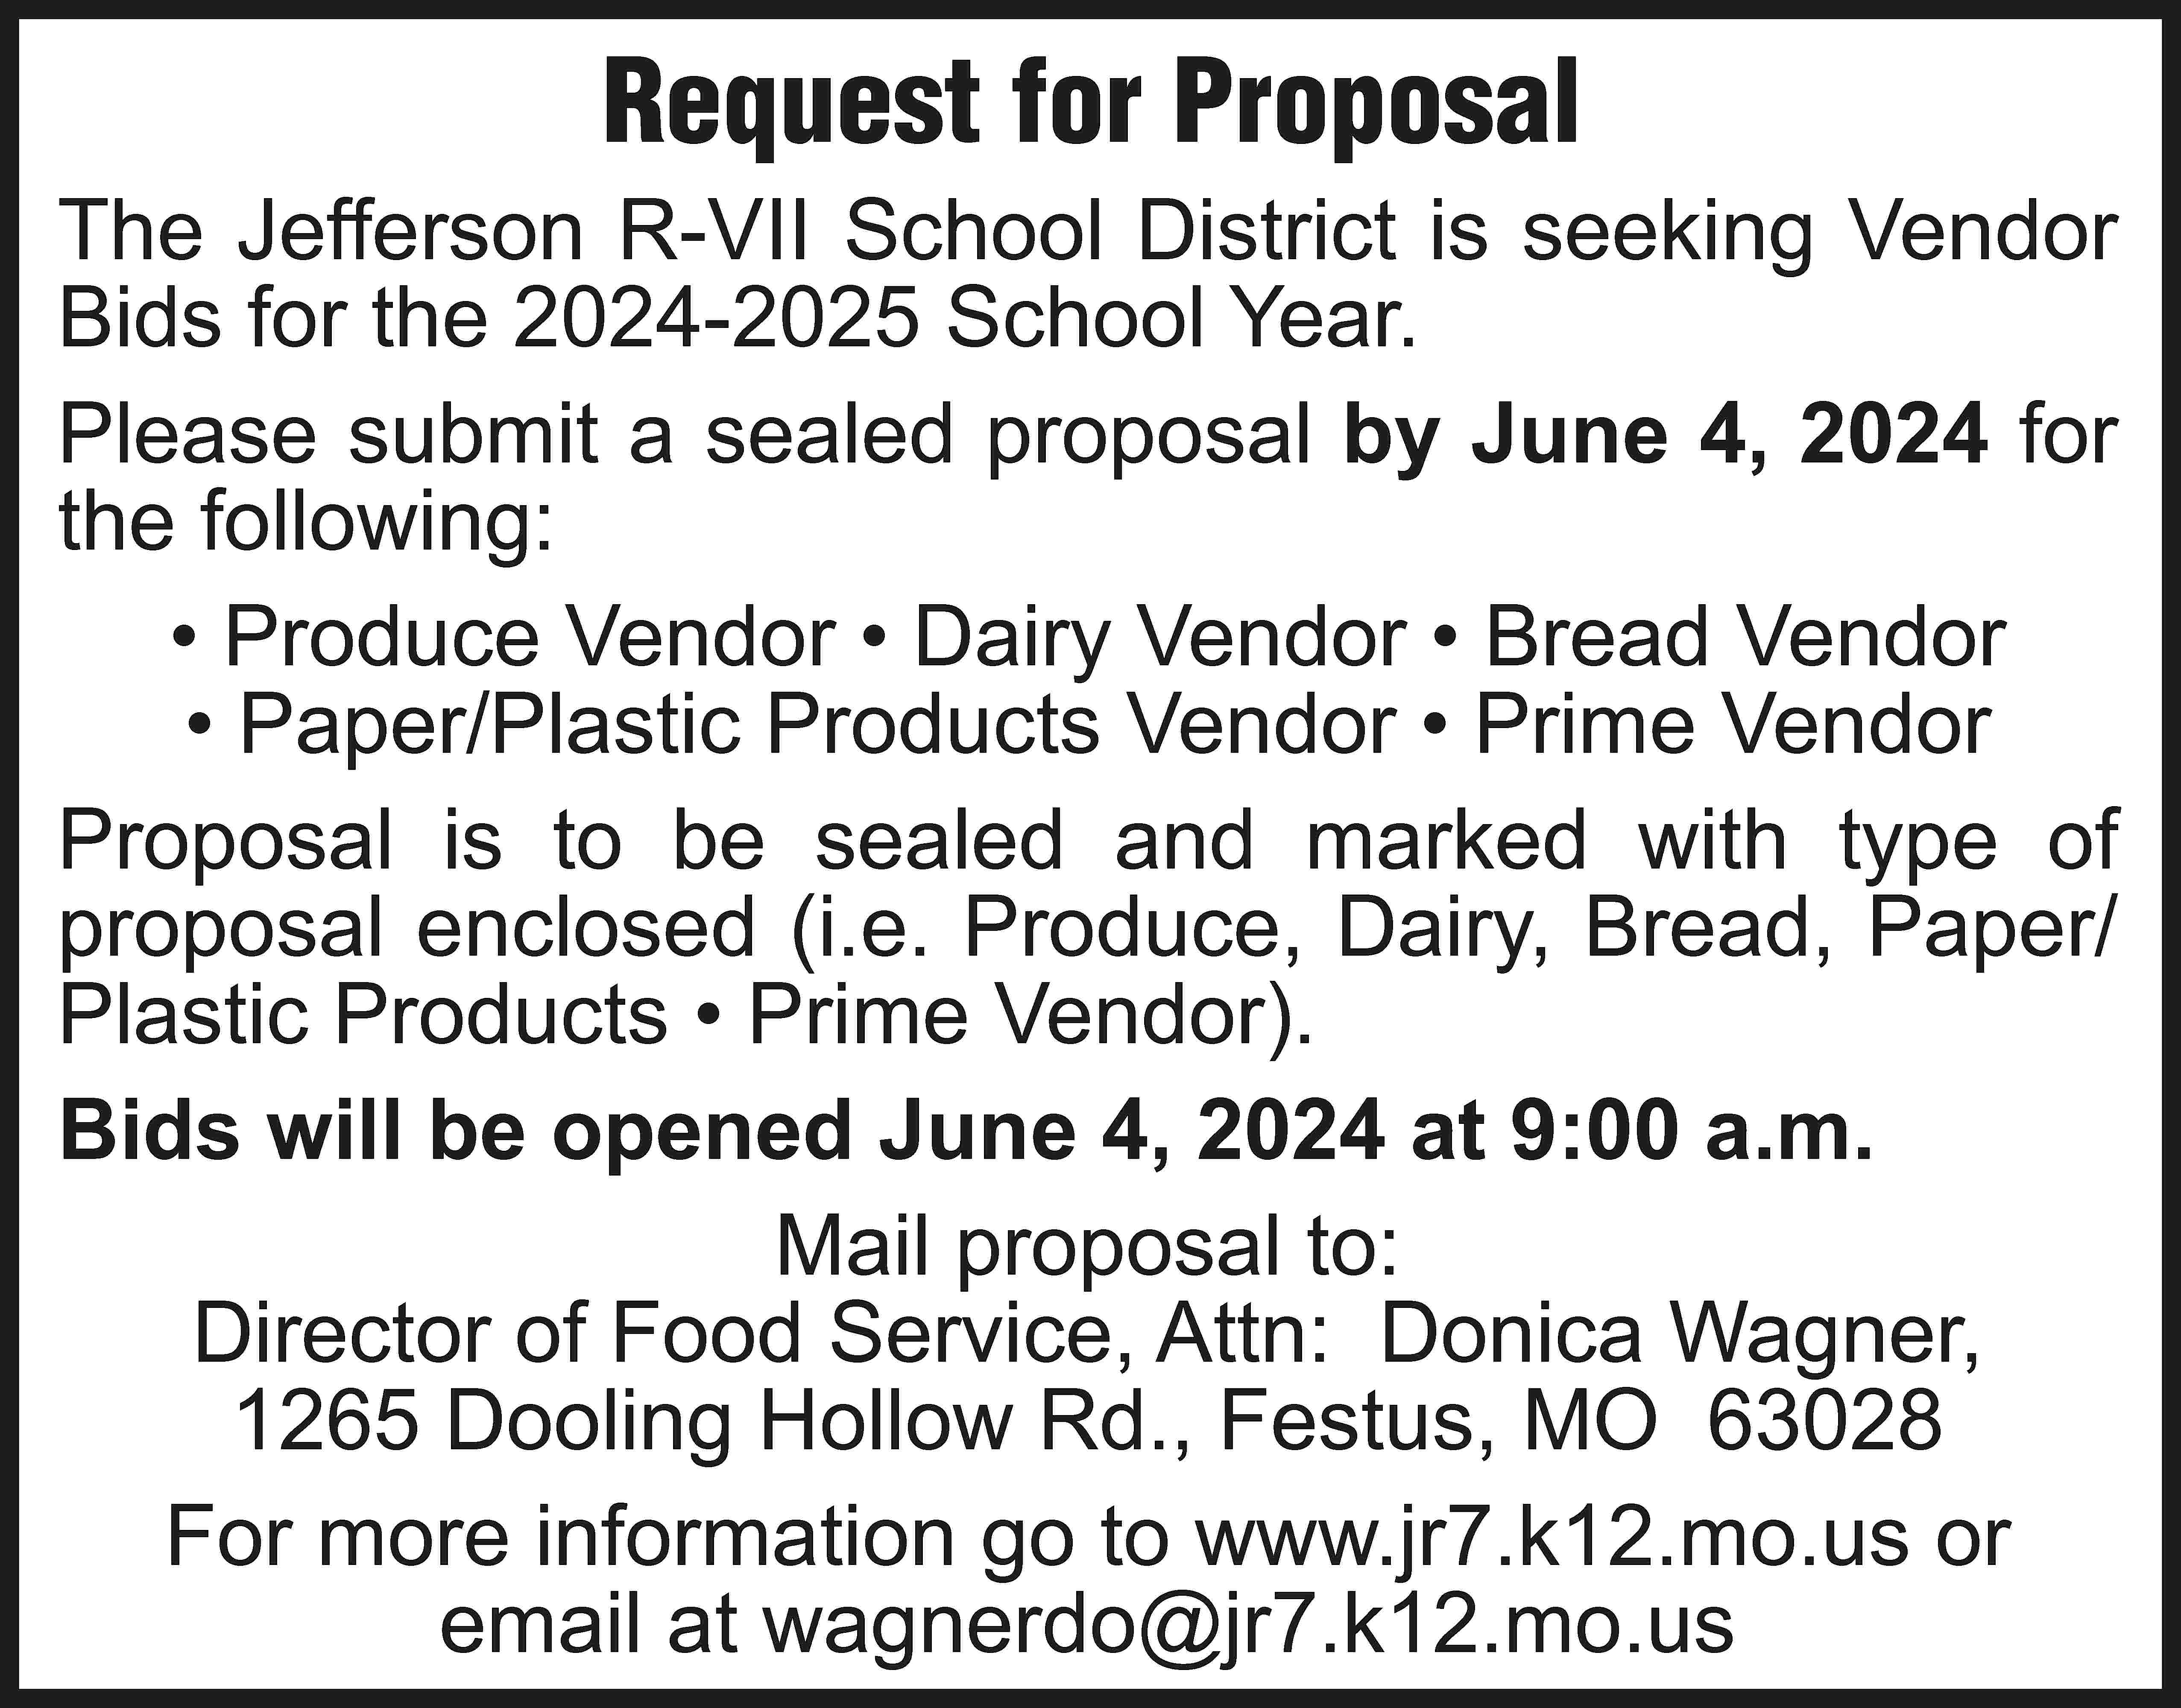 Request for Proposal The Jefferson  Request for Proposal The Jefferson R-VII School District is seeking Vendor Bids for the 2024-2025 School Year. Please submit a sealed proposal by June 4, 2024 for the following: • Produce Vendor • Dairy Vendor • Bread Vendor • Paper/Plastic Products Vendor • Prime Vendor Proposal is to be sealed and marked with type of proposal enclosed (i.e. Produce, Dairy, Bread, Paper/ Plastic Products • Prime Vendor). Bids will be opened June 4, 2024 at 9:00 a.m. Mail proposal to: Director of Food Service, Attn: Donica Wagner, 1265 Dooling Hollow Rd., Festus, MO 63028 For more information go to www.jr7.k12.mo.us or email at wagnerdo@jr7.k12.mo.us